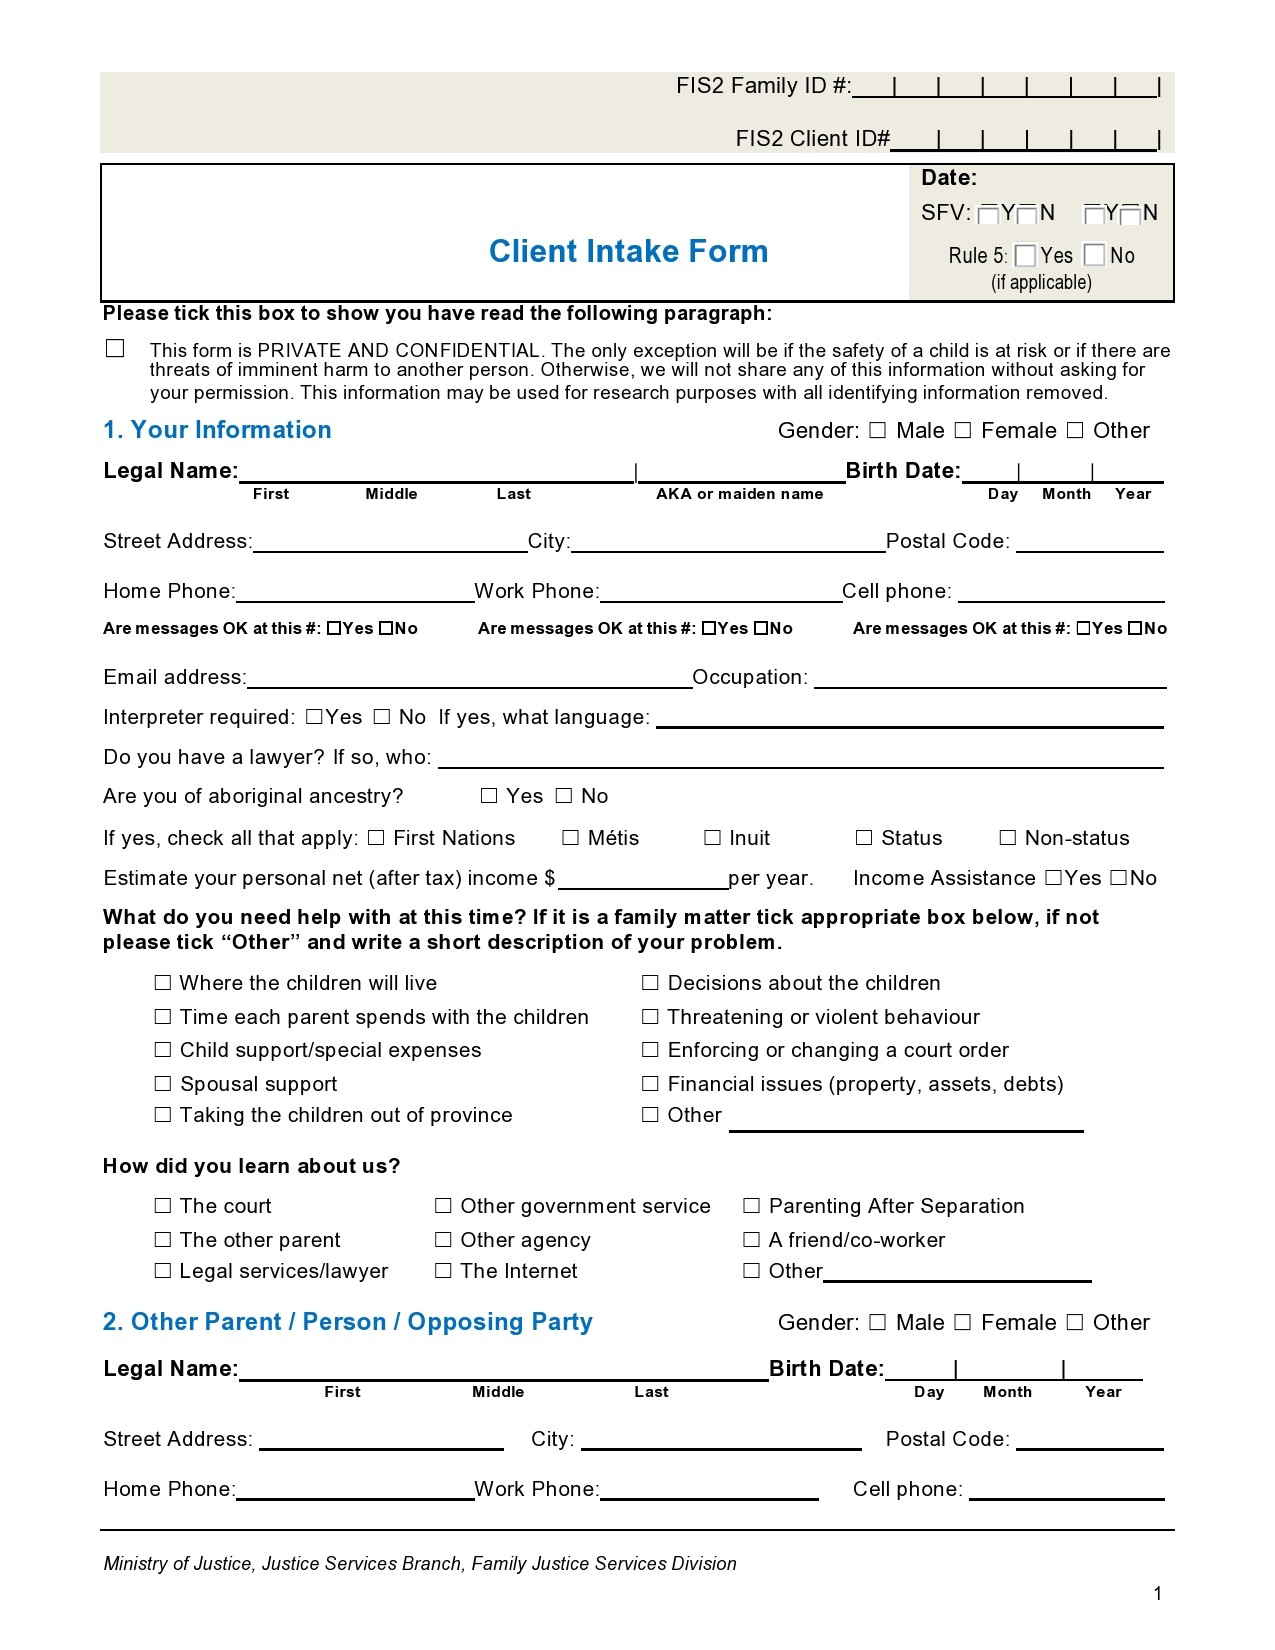 Free client intake form 04